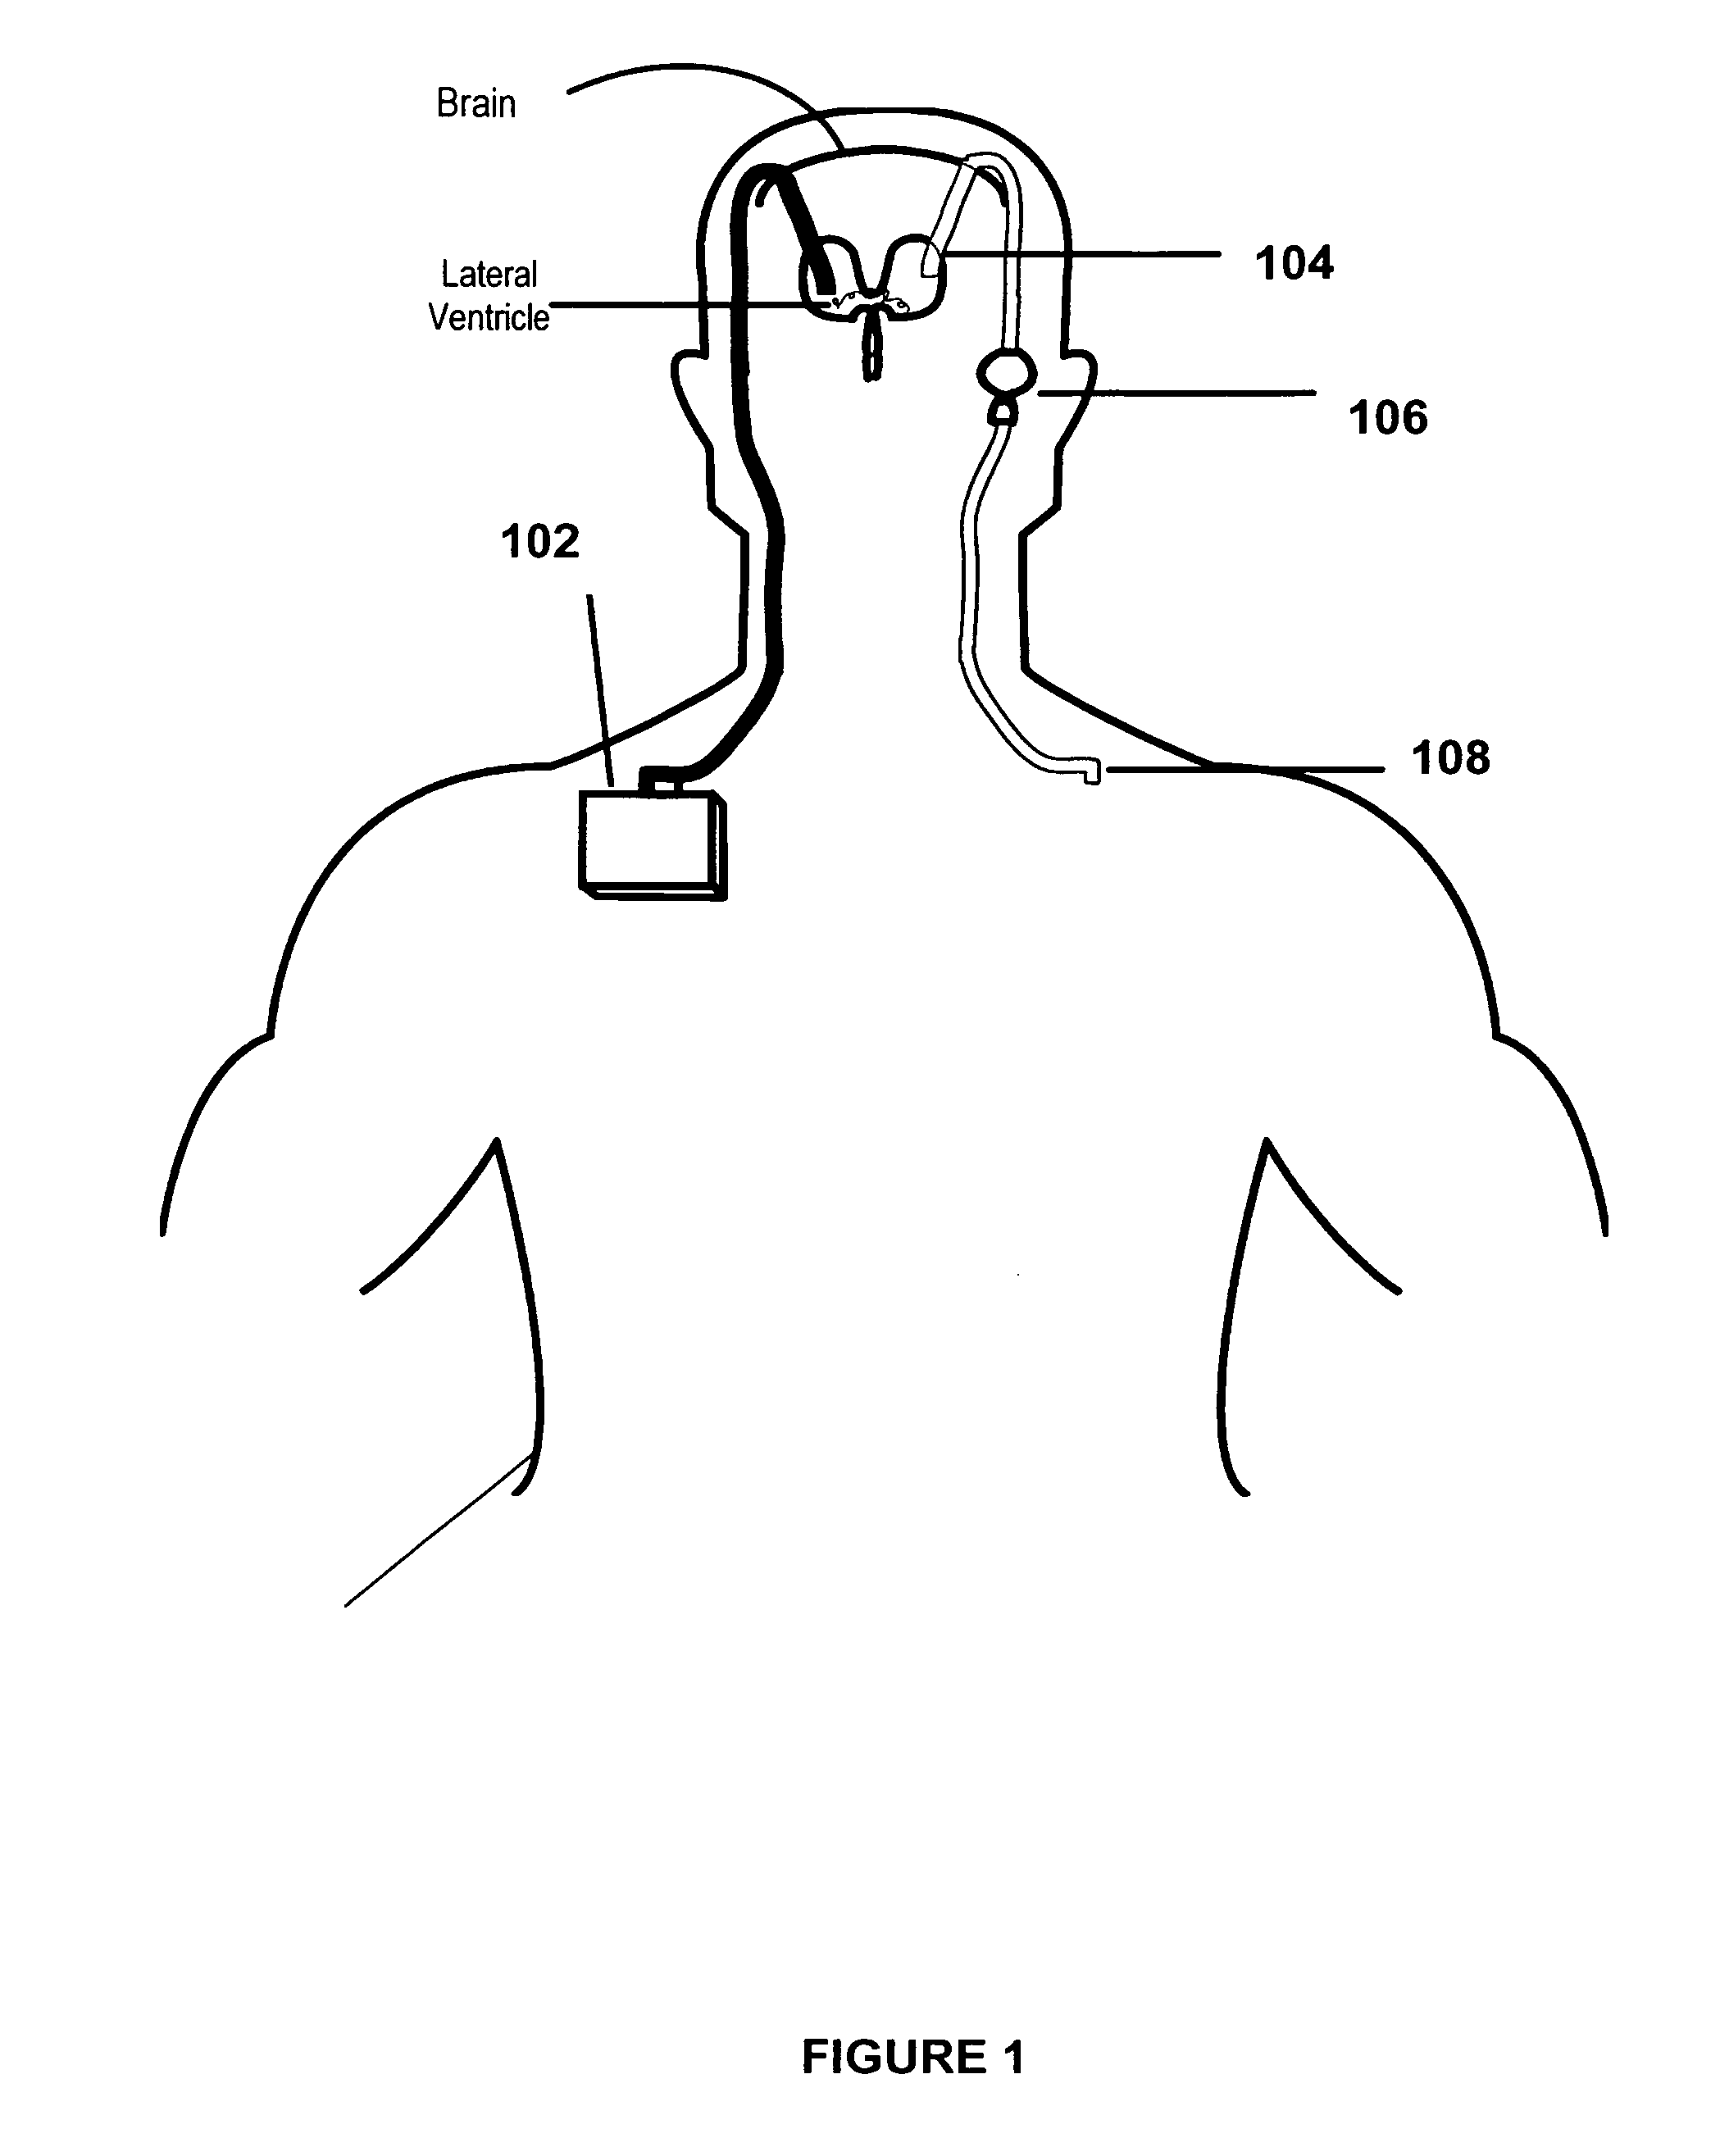 Method and apparatus for removing harmful proteins from a mammalian's ventricular cerebrospinal fluid